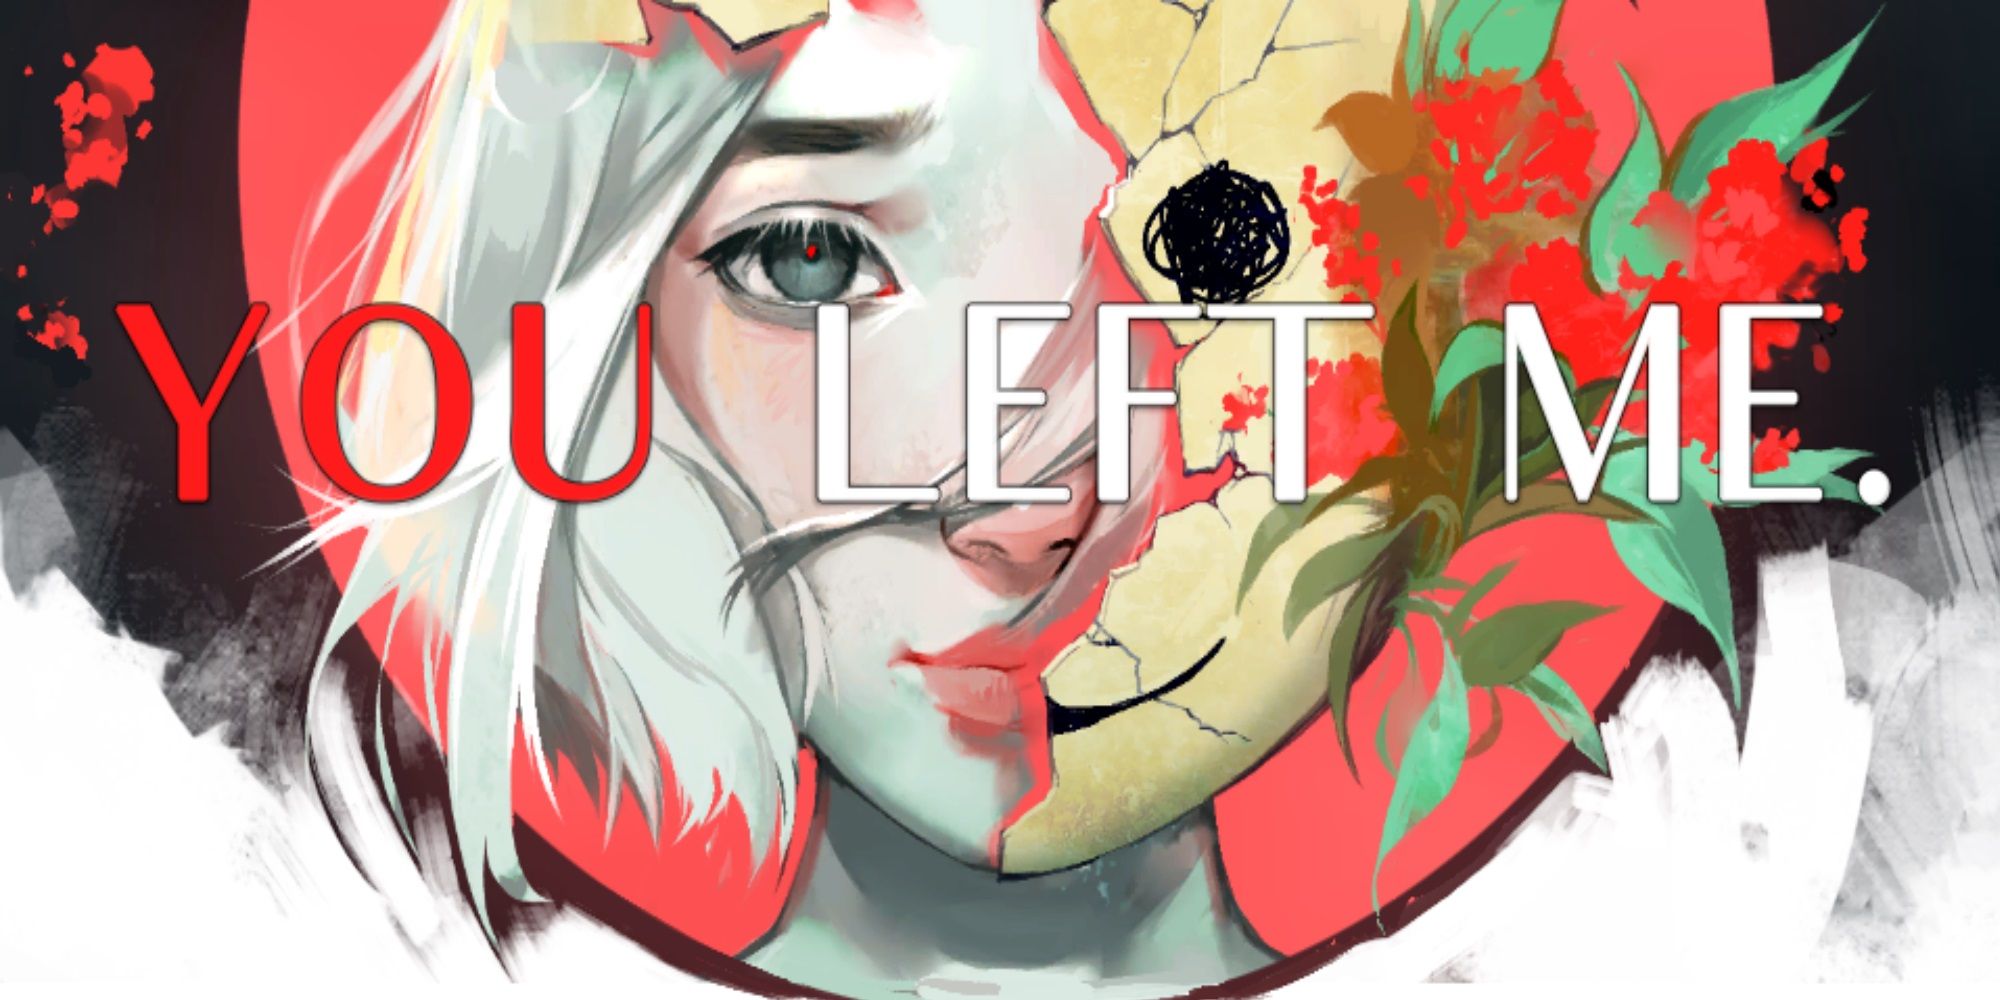 You Left Me - The Title Screen